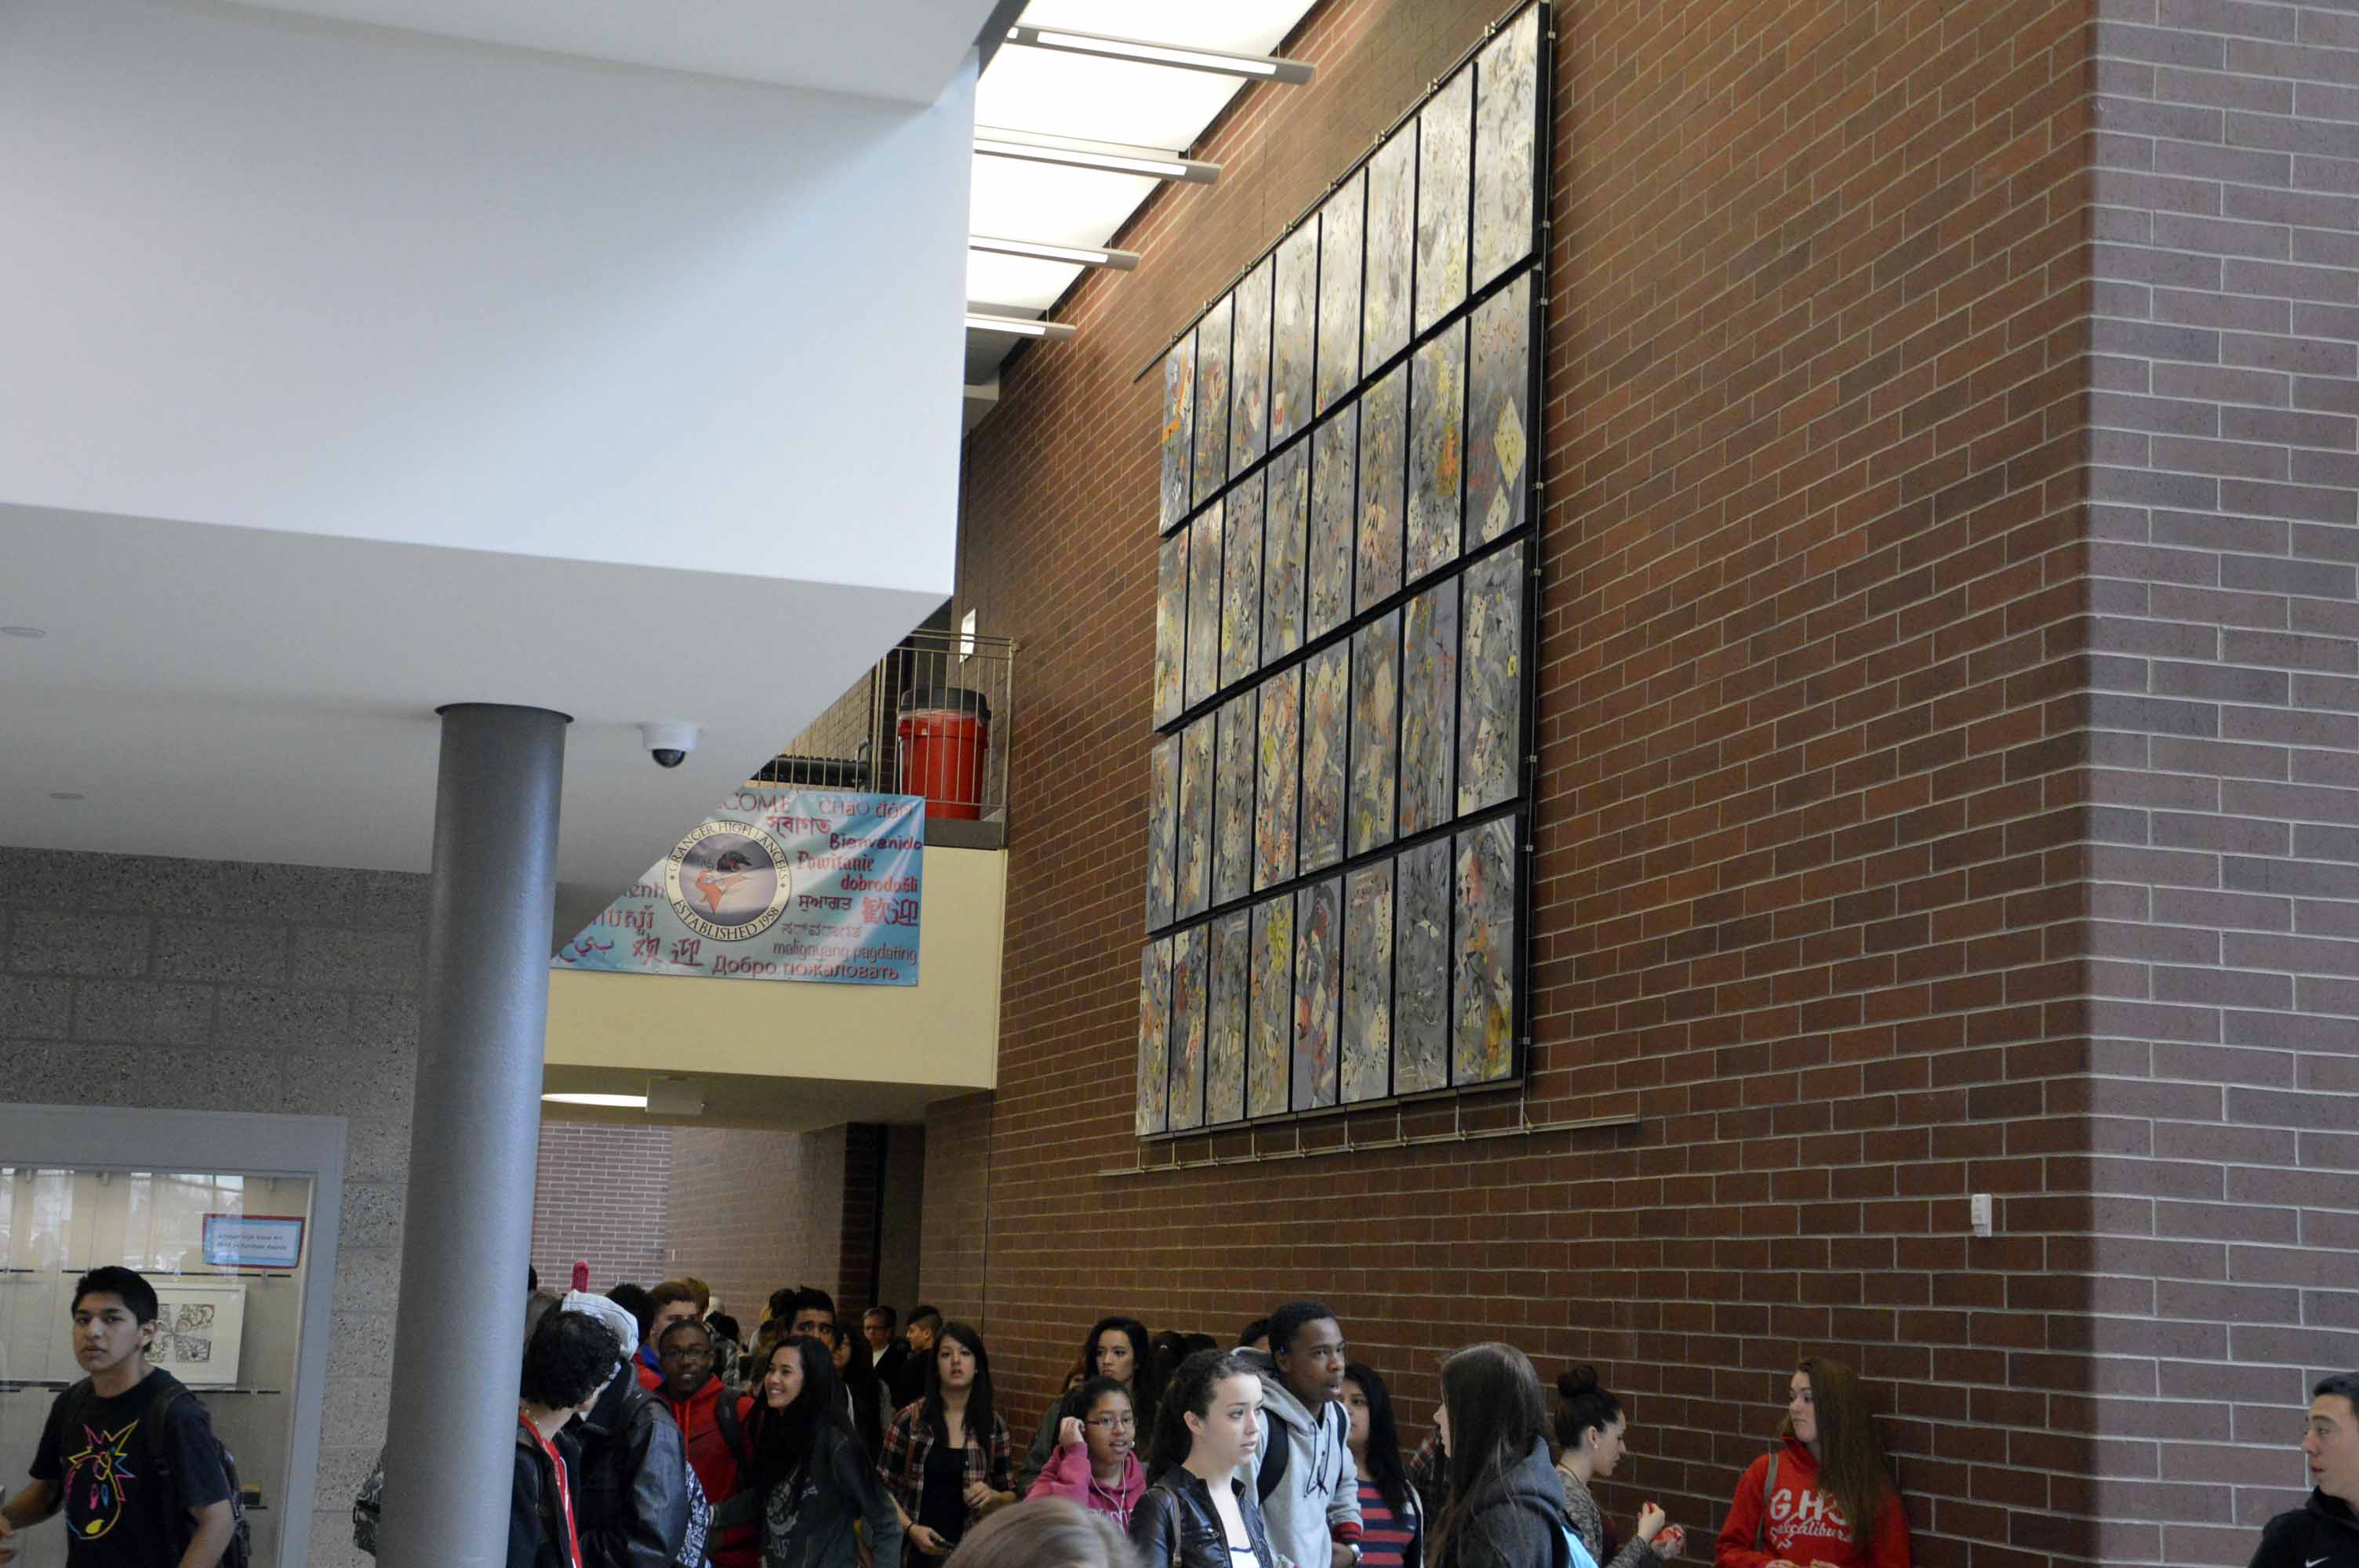 New student-made mural at Granger High exhibits values of literacy